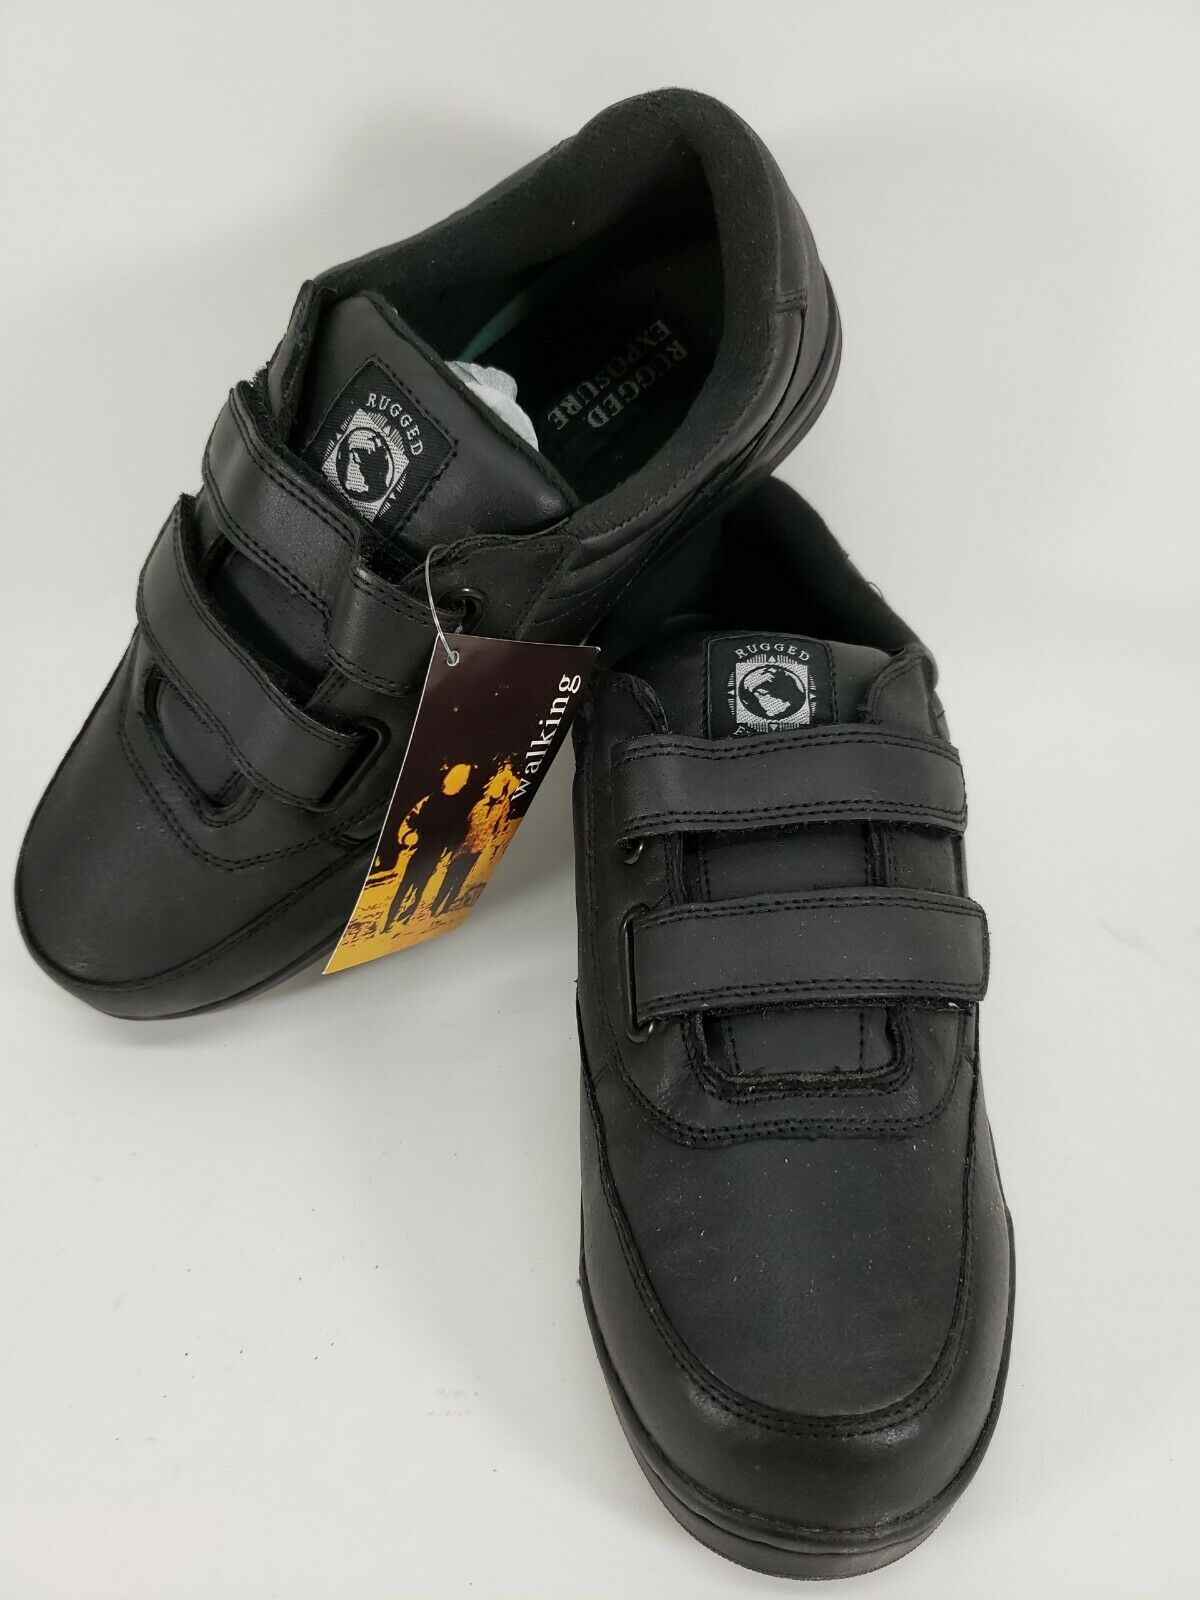 Rugged Exposure Journey Plus Wide Men’s Walking Shoes Black Size 8.5 NWT